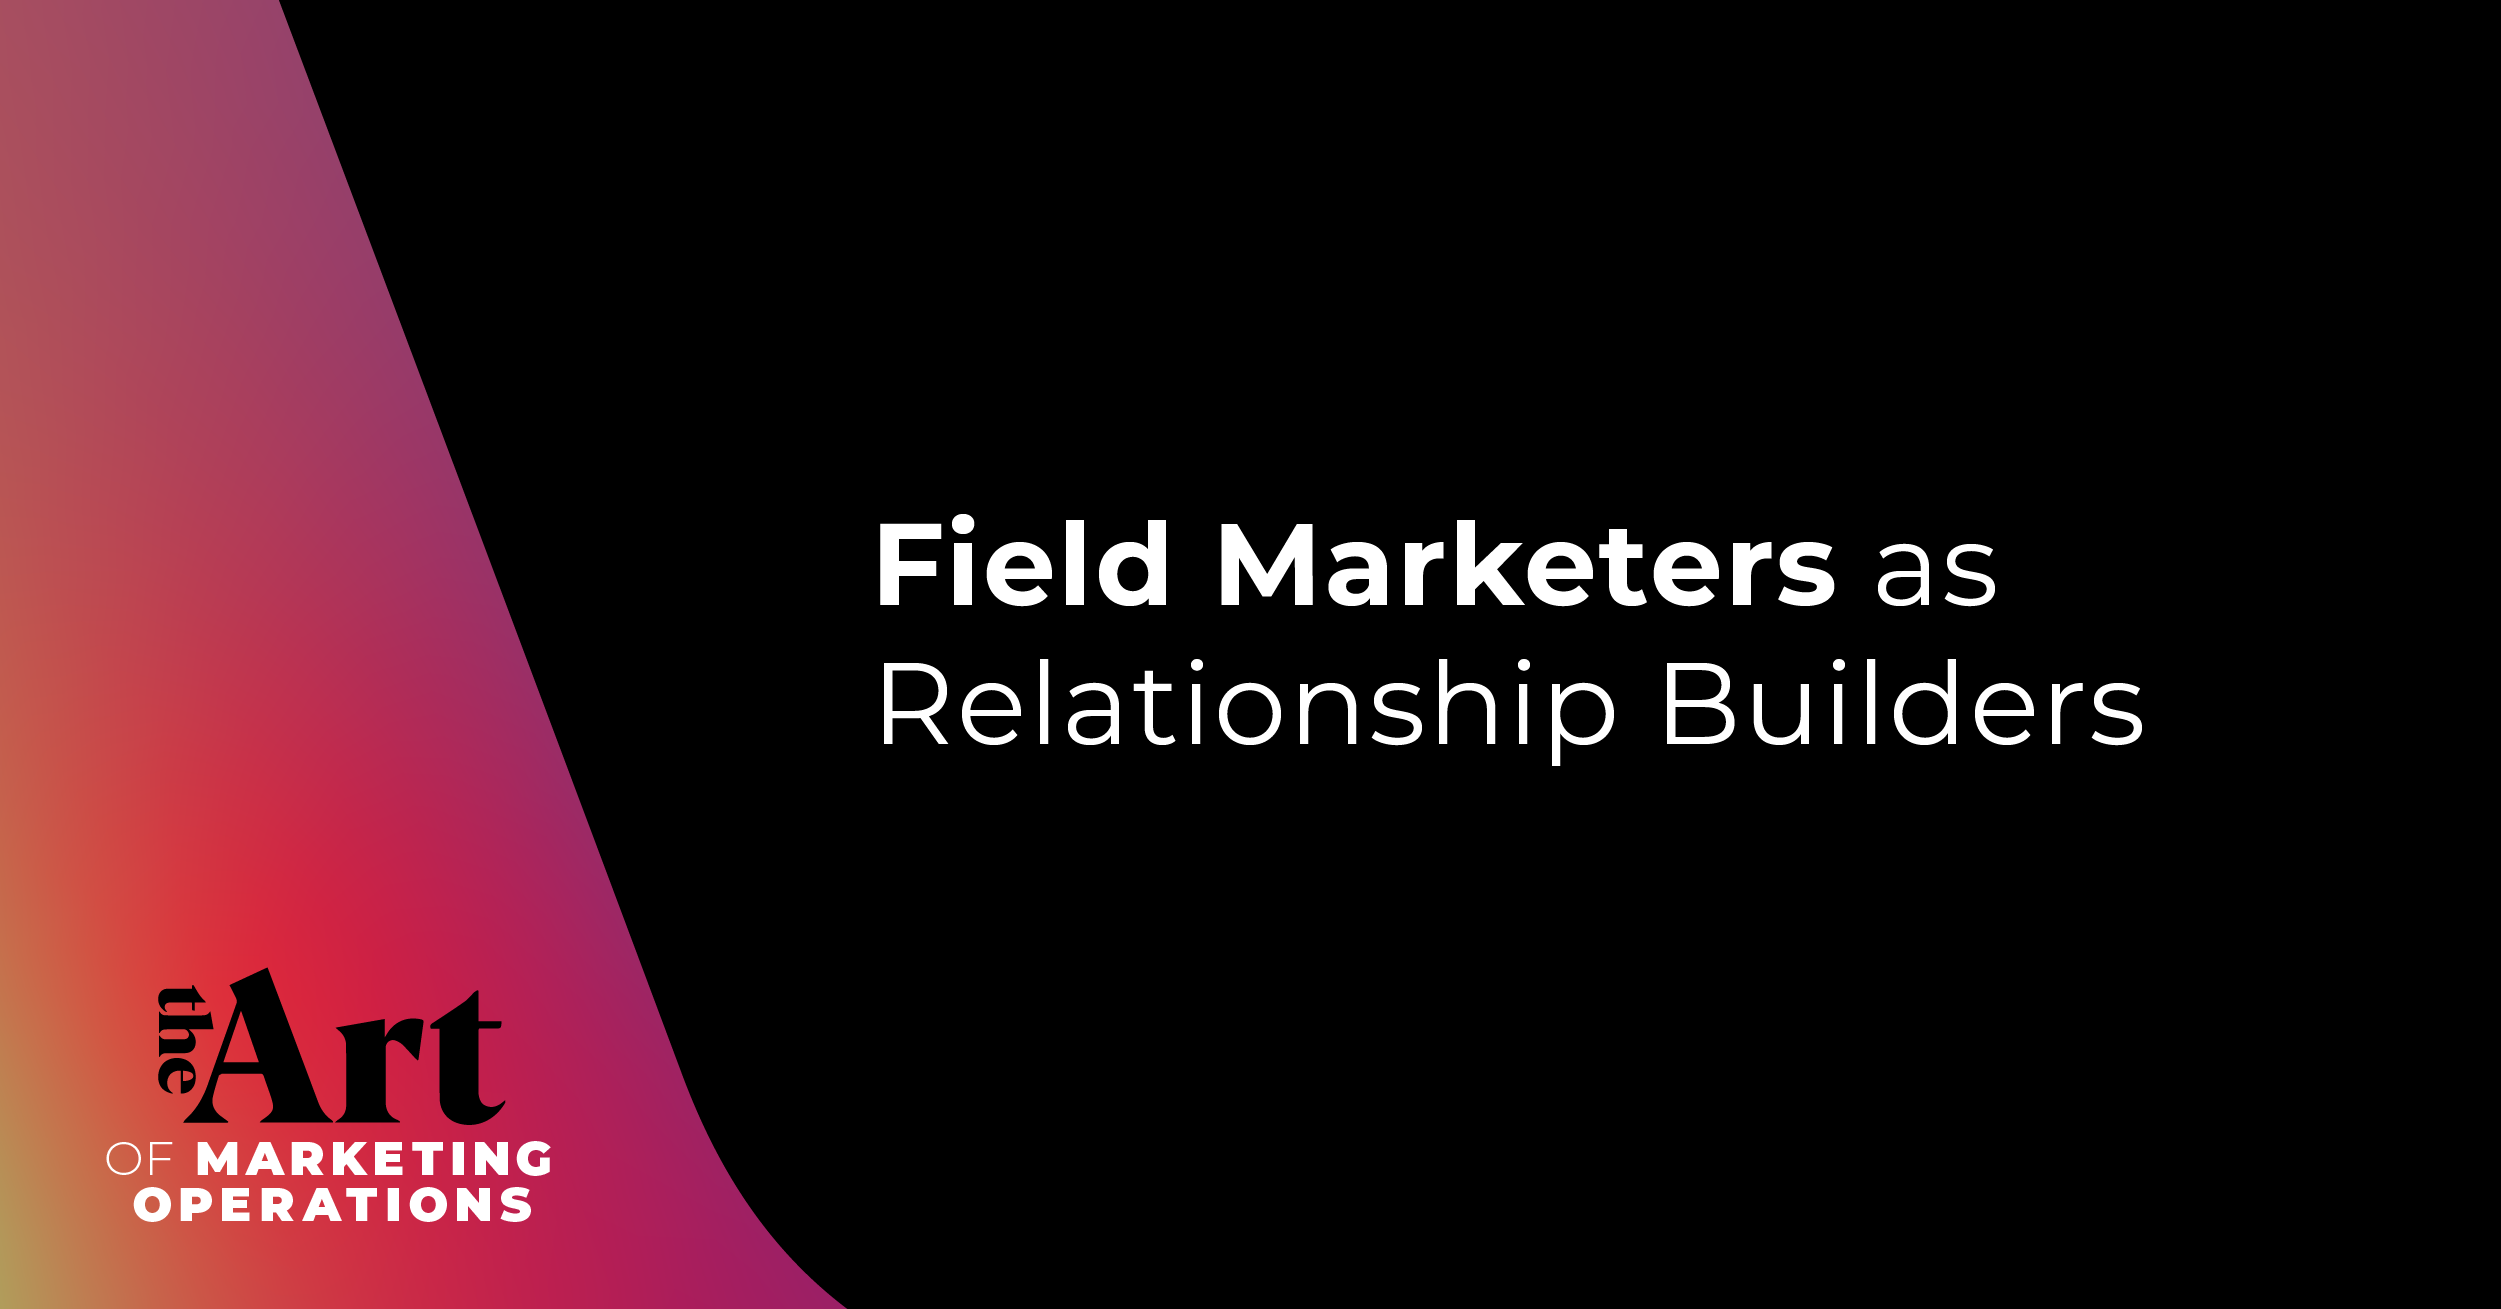 Field Marketers as Relationship Builders